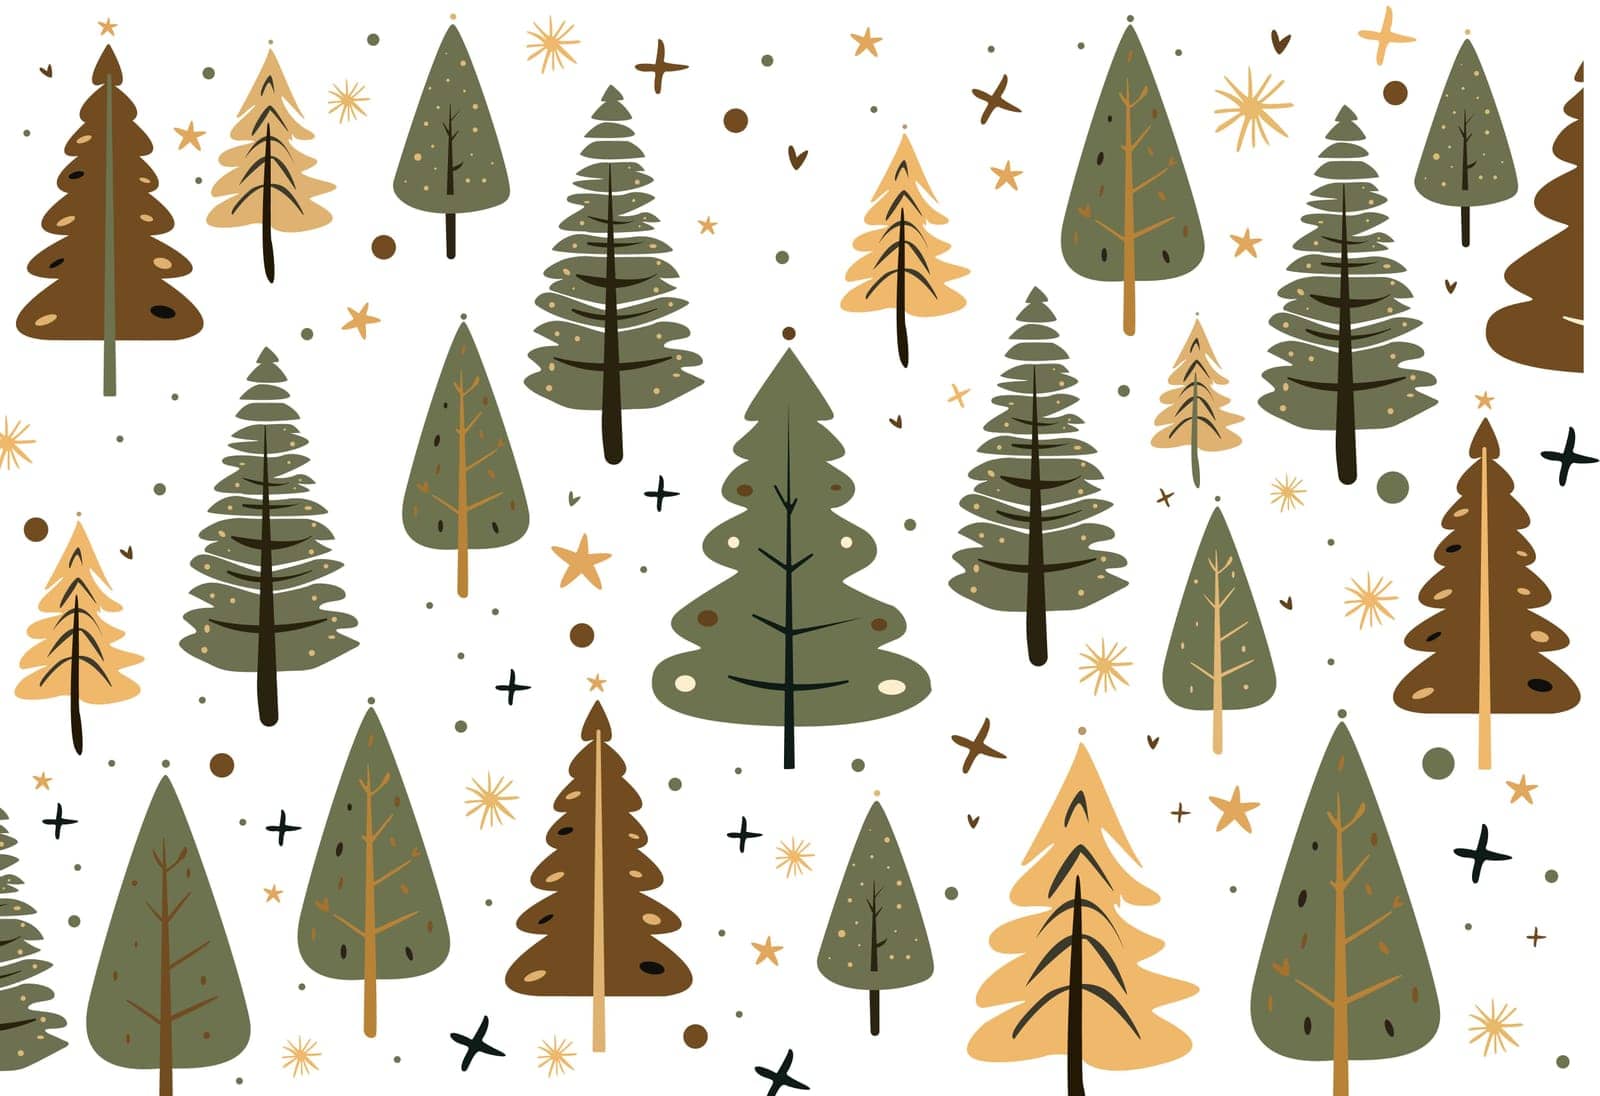 New Year background with the image of various Christmas trees, modern flat design. Can be used for printed materials - leaflets, posters, business cards or for web.